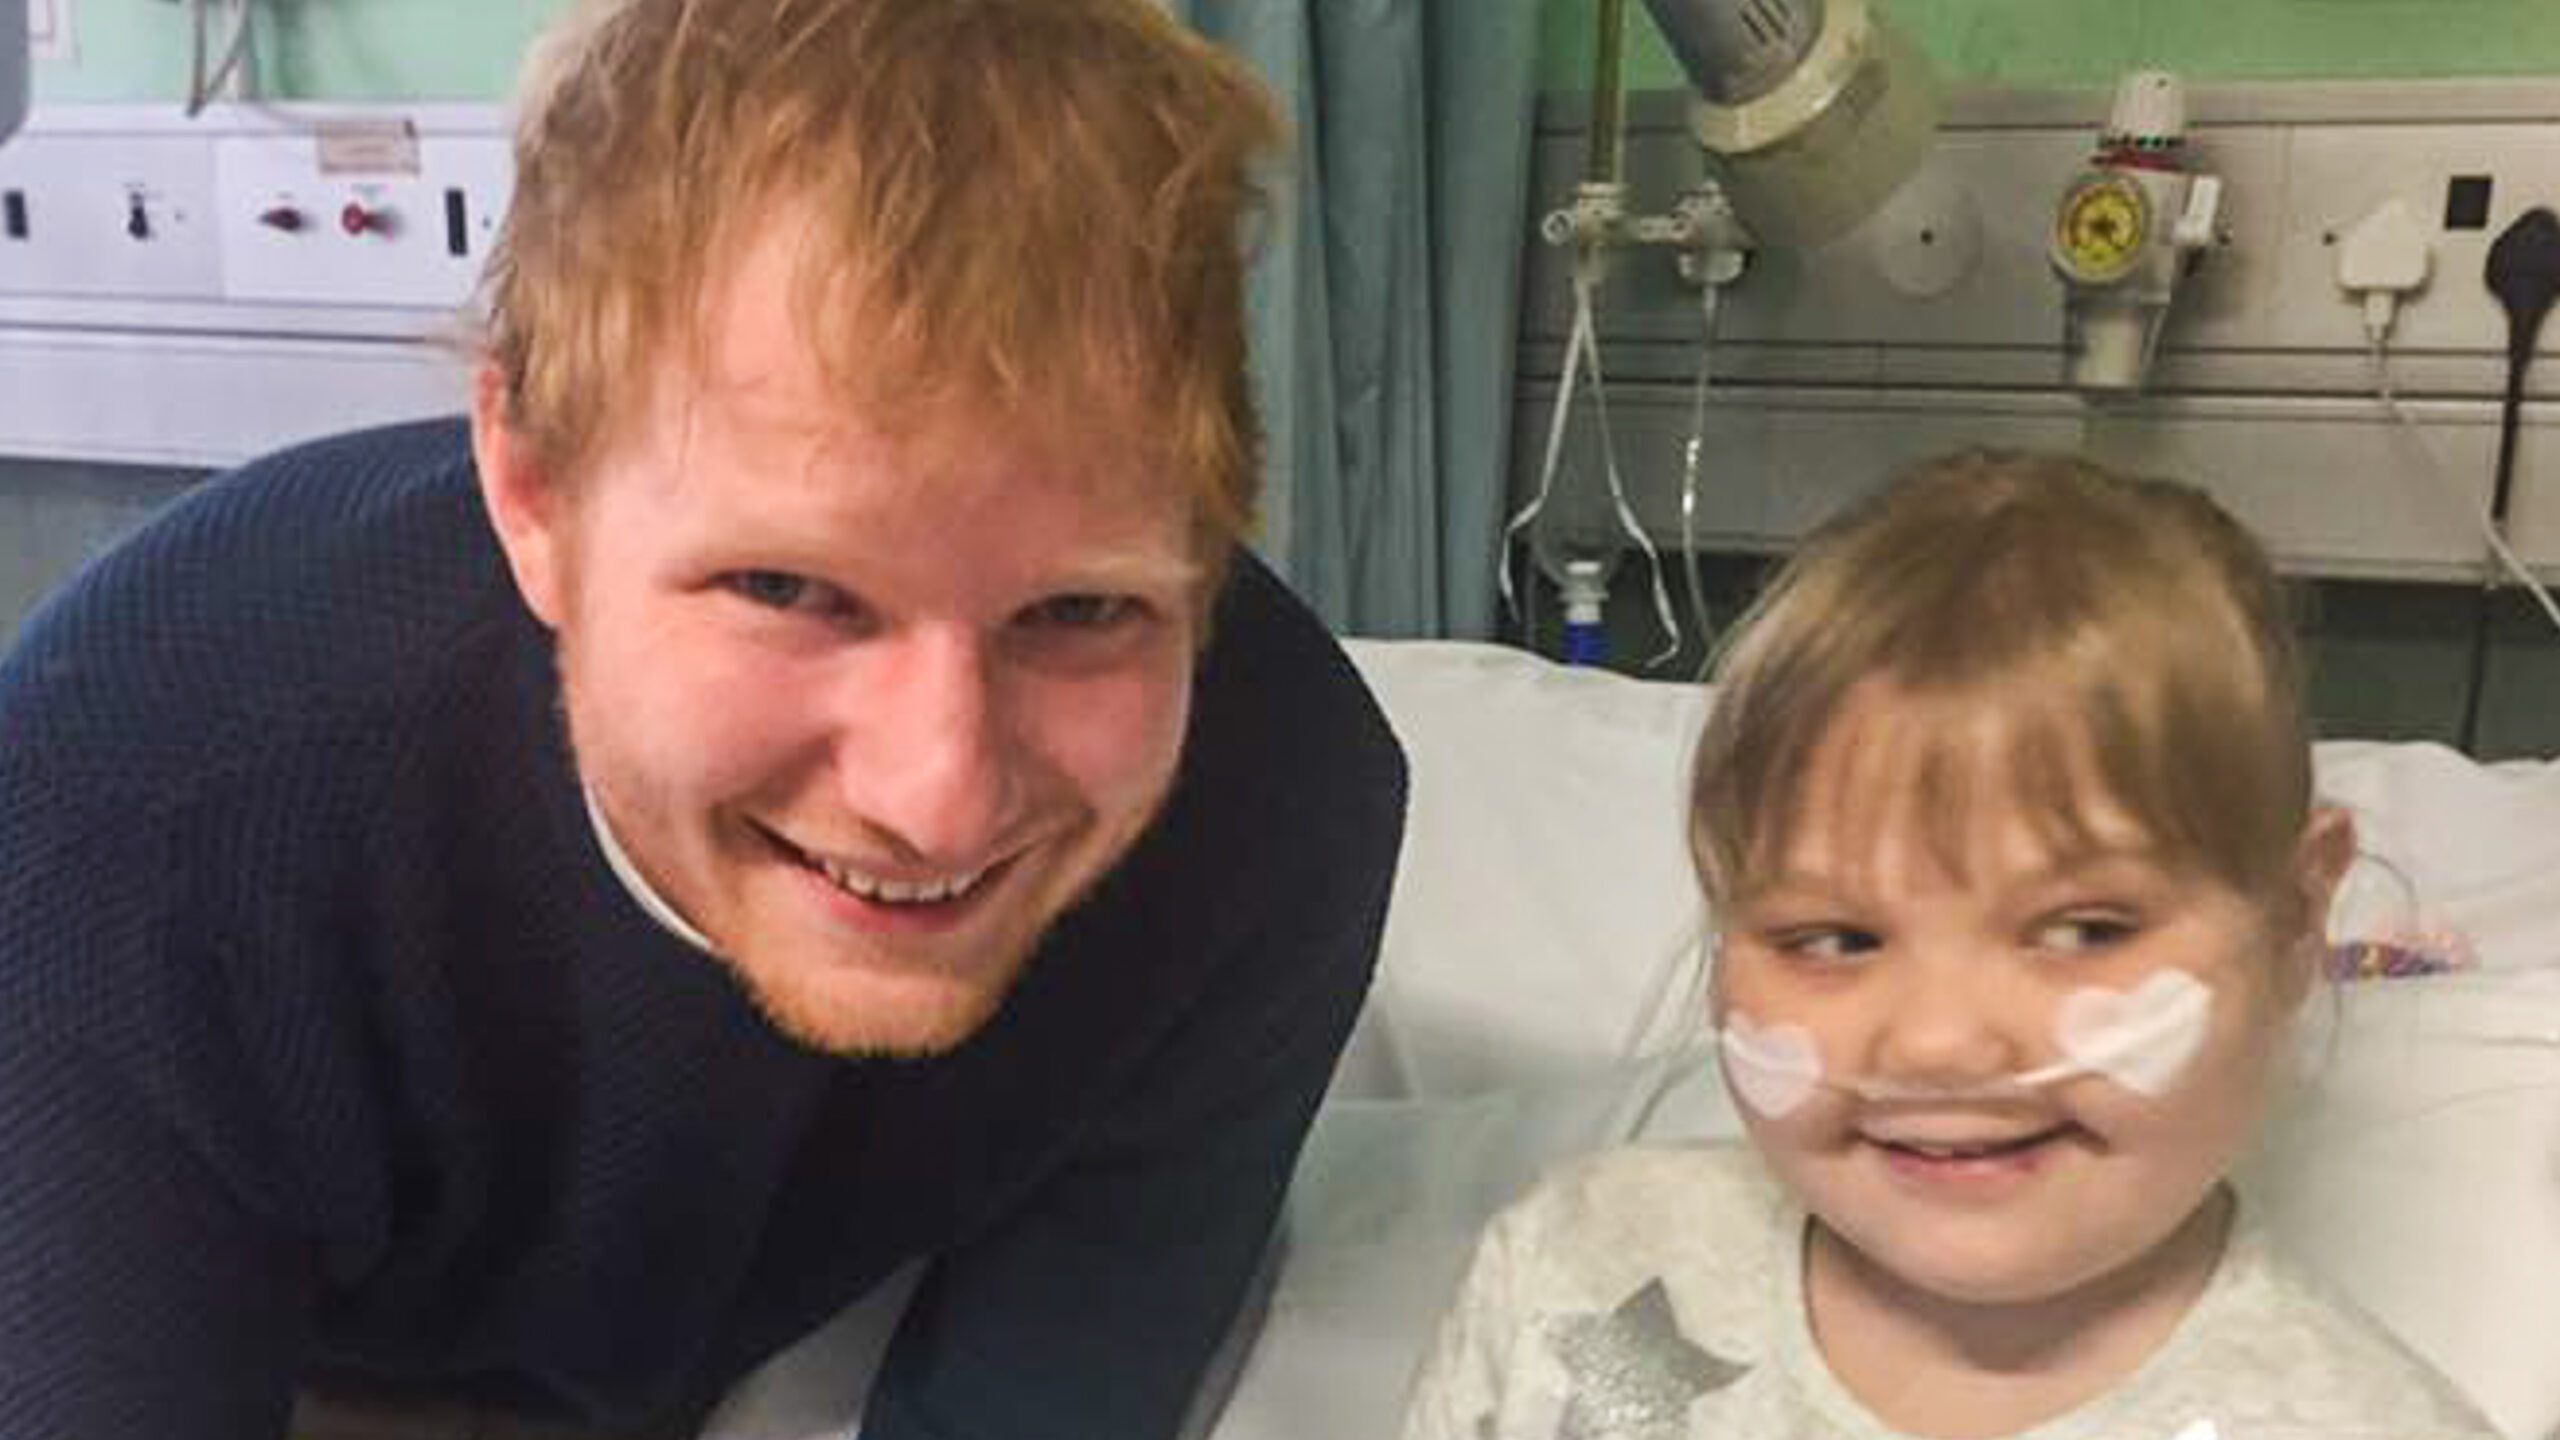 WATCH: Ed Sheeran surprises to 9-year-old fan in hospital with mini concert